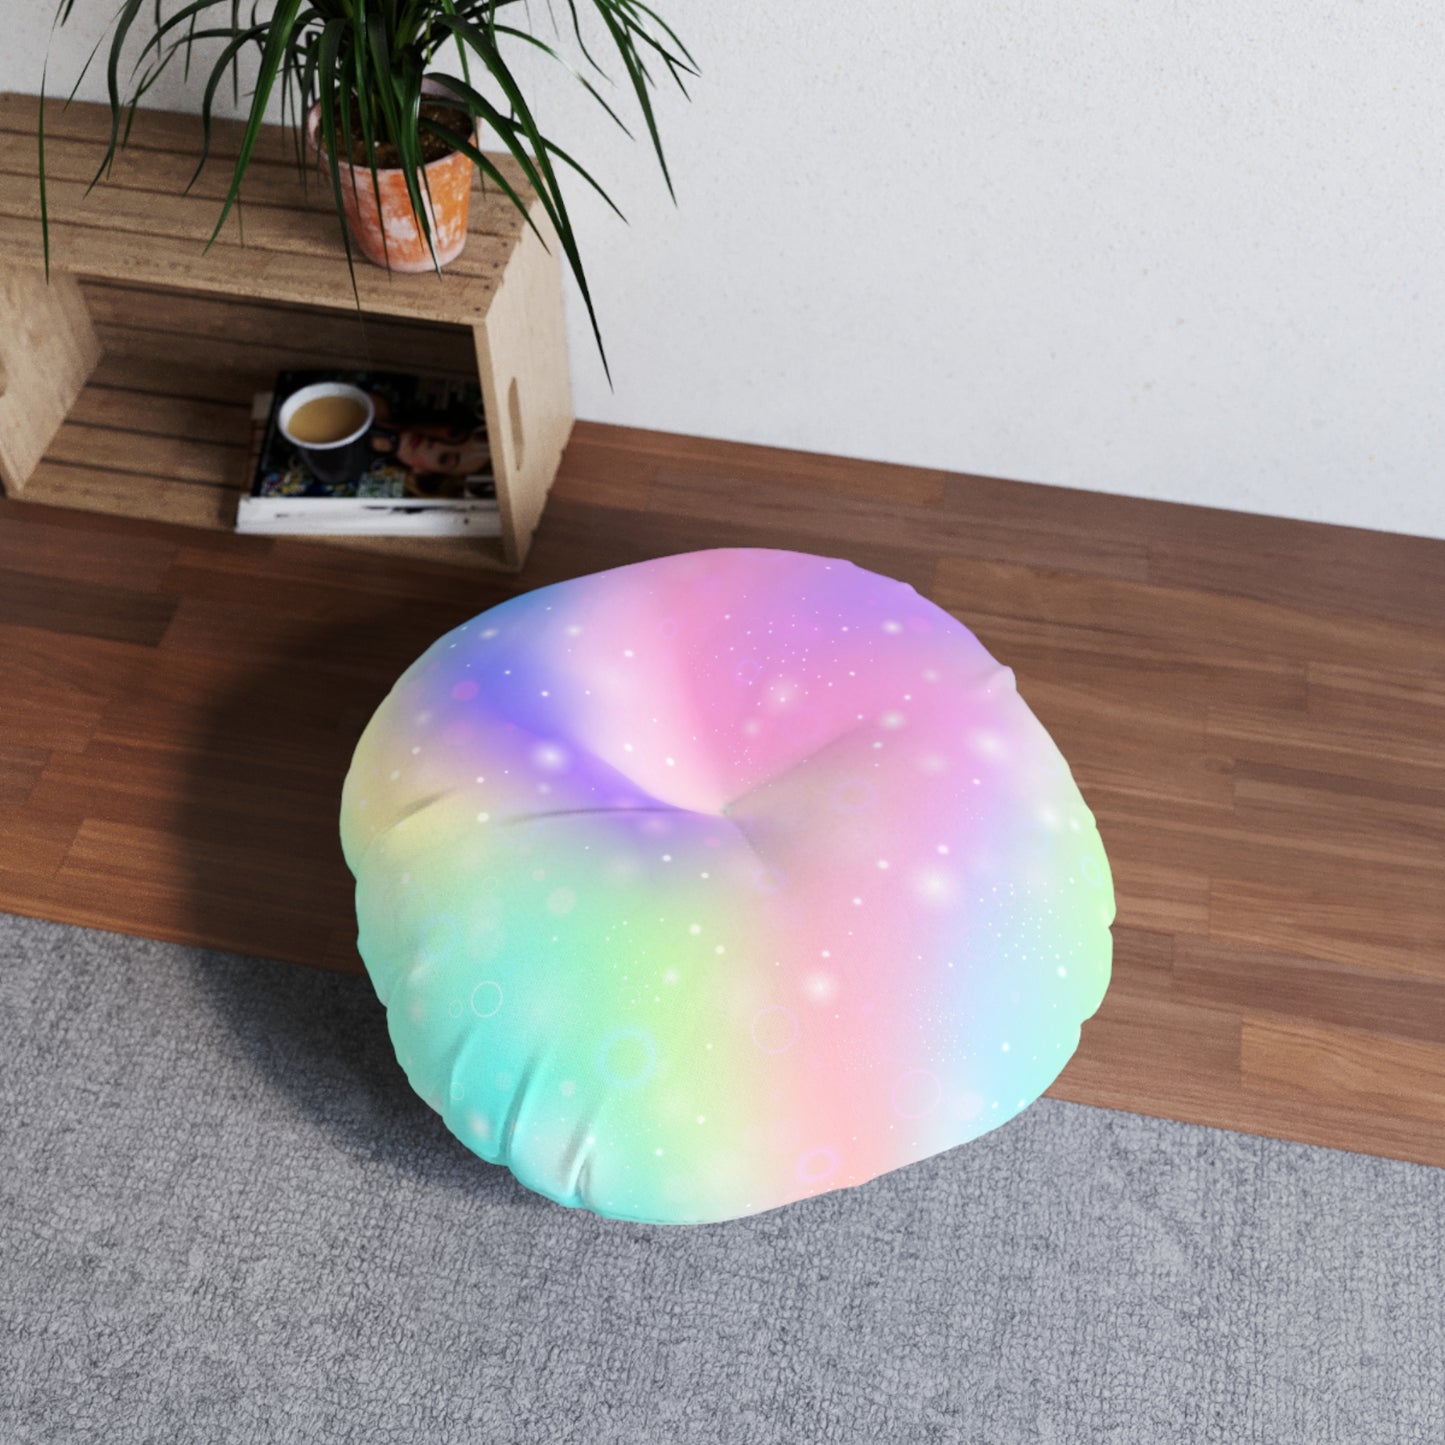 Tufted Floor Pillow, Round, Kid's Floor Pillow For Sitting, Comes in 2 Sizes